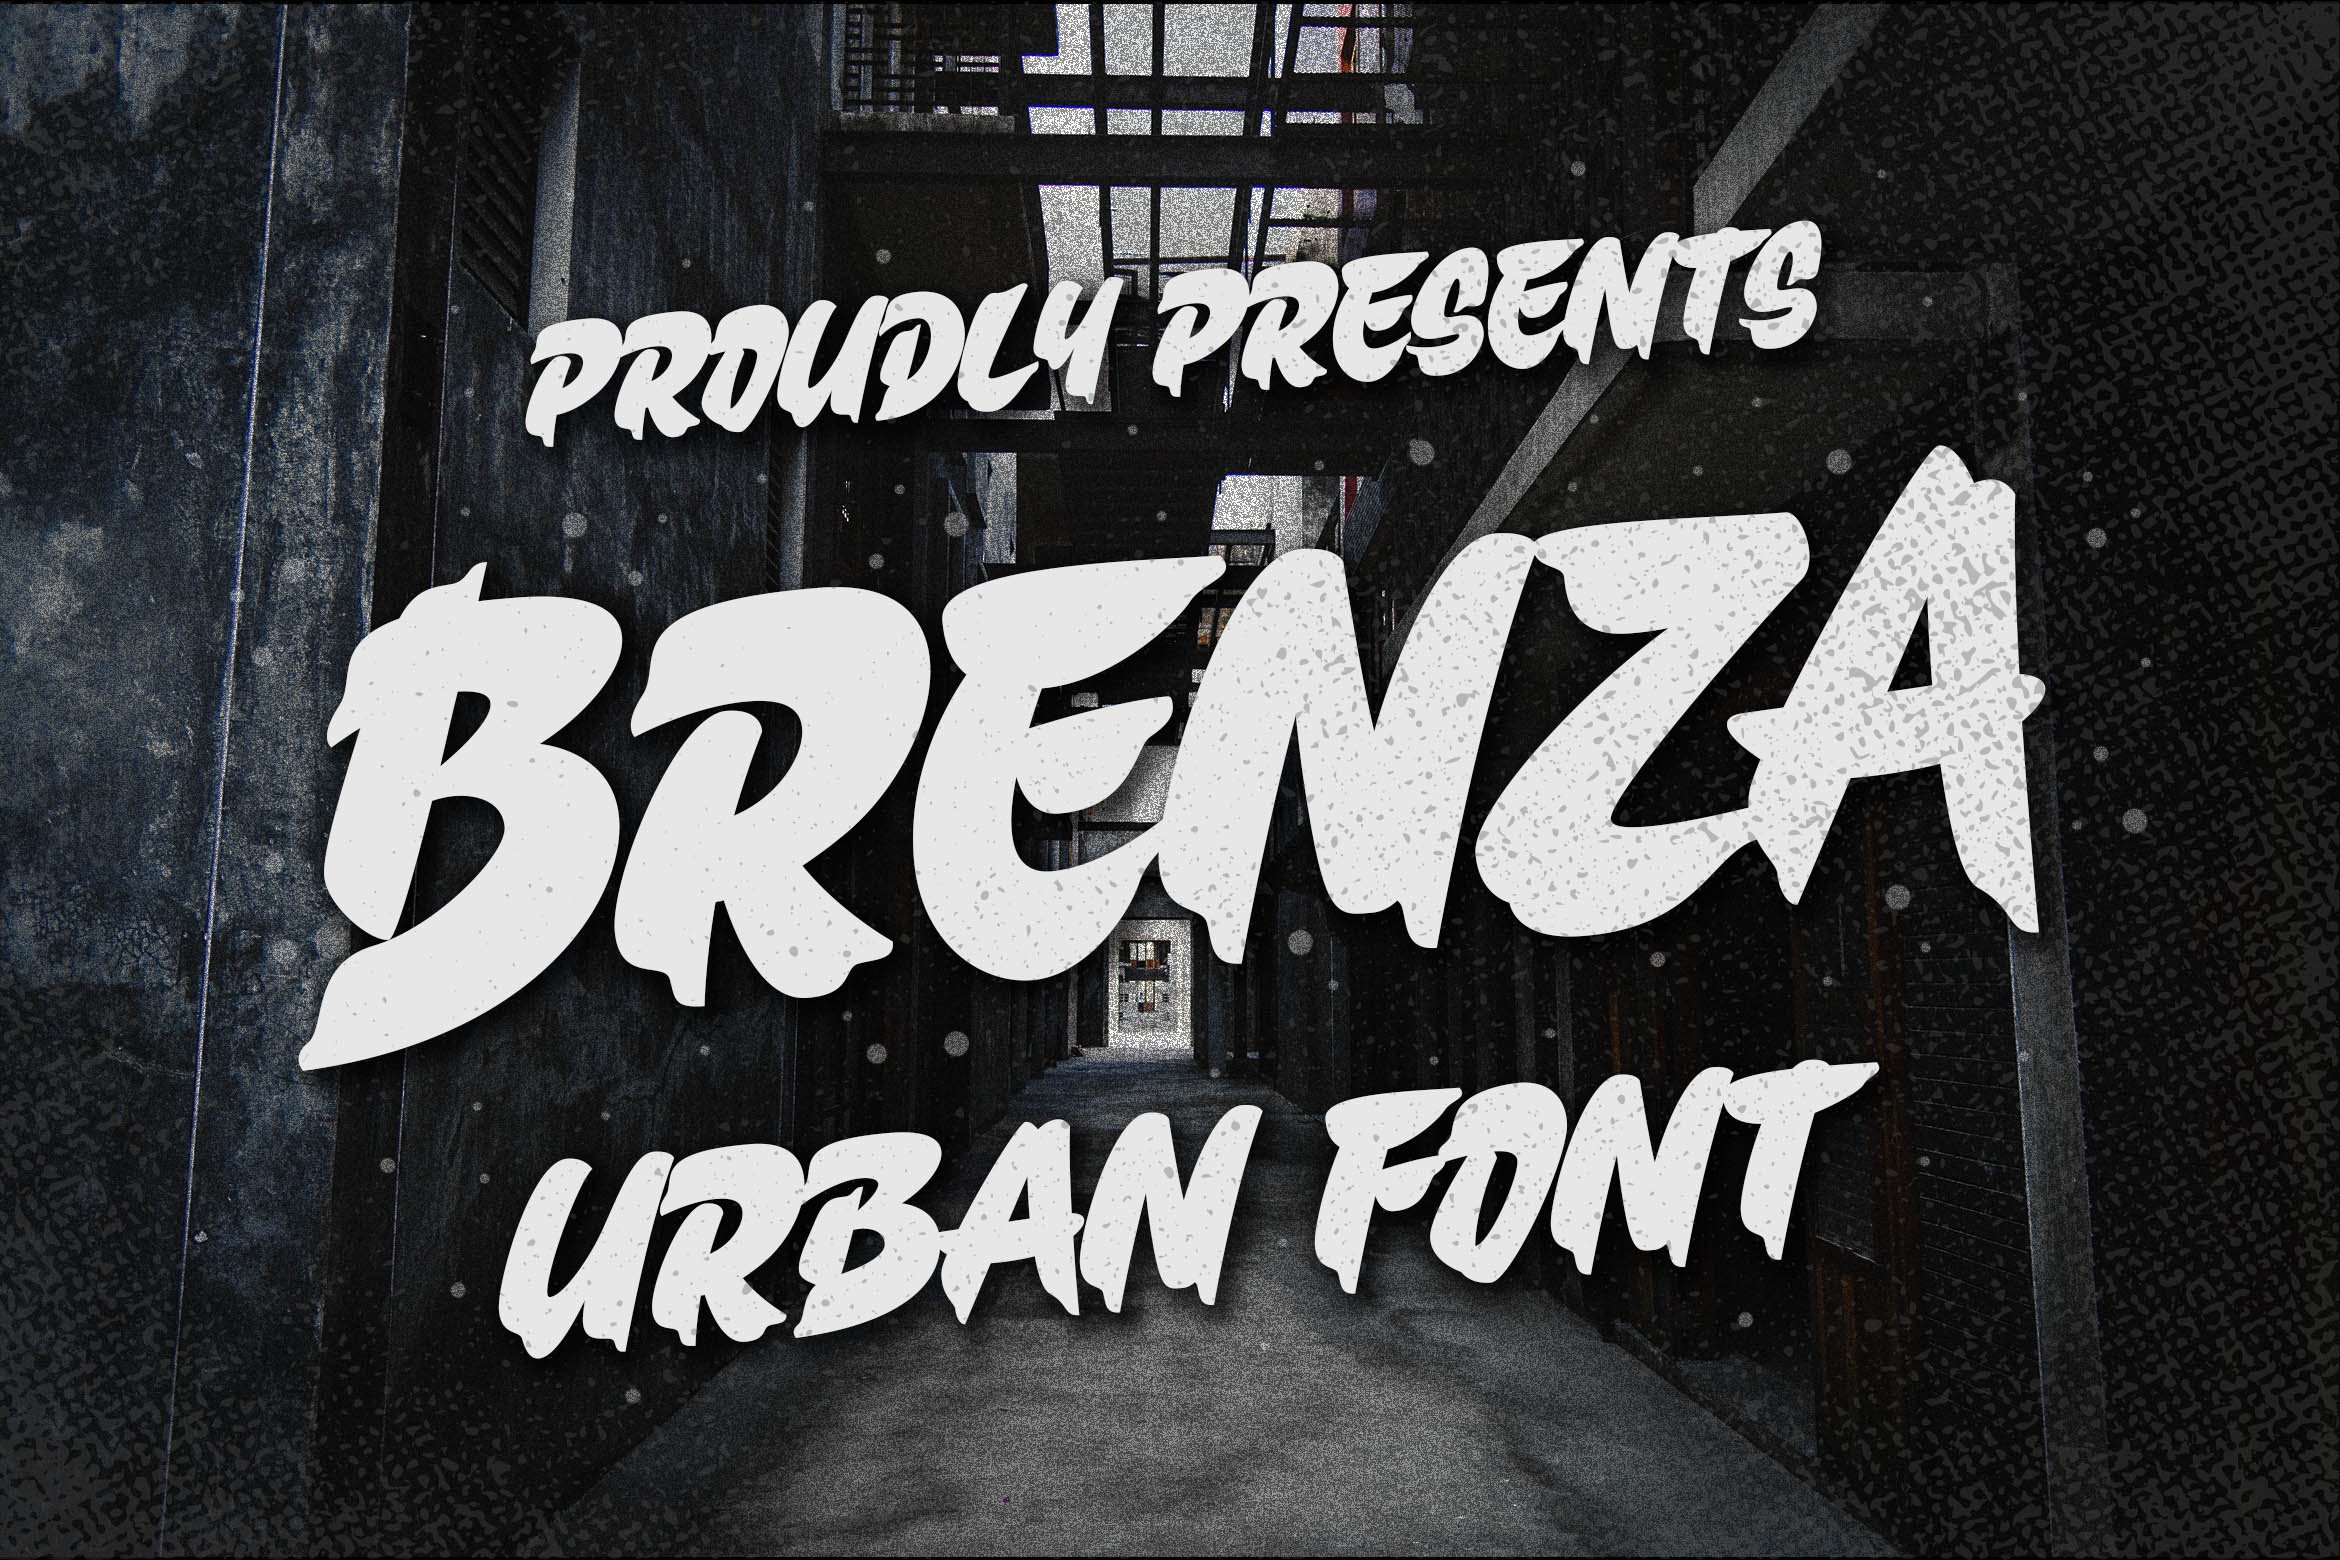 Brenza - Urban Font cover image.